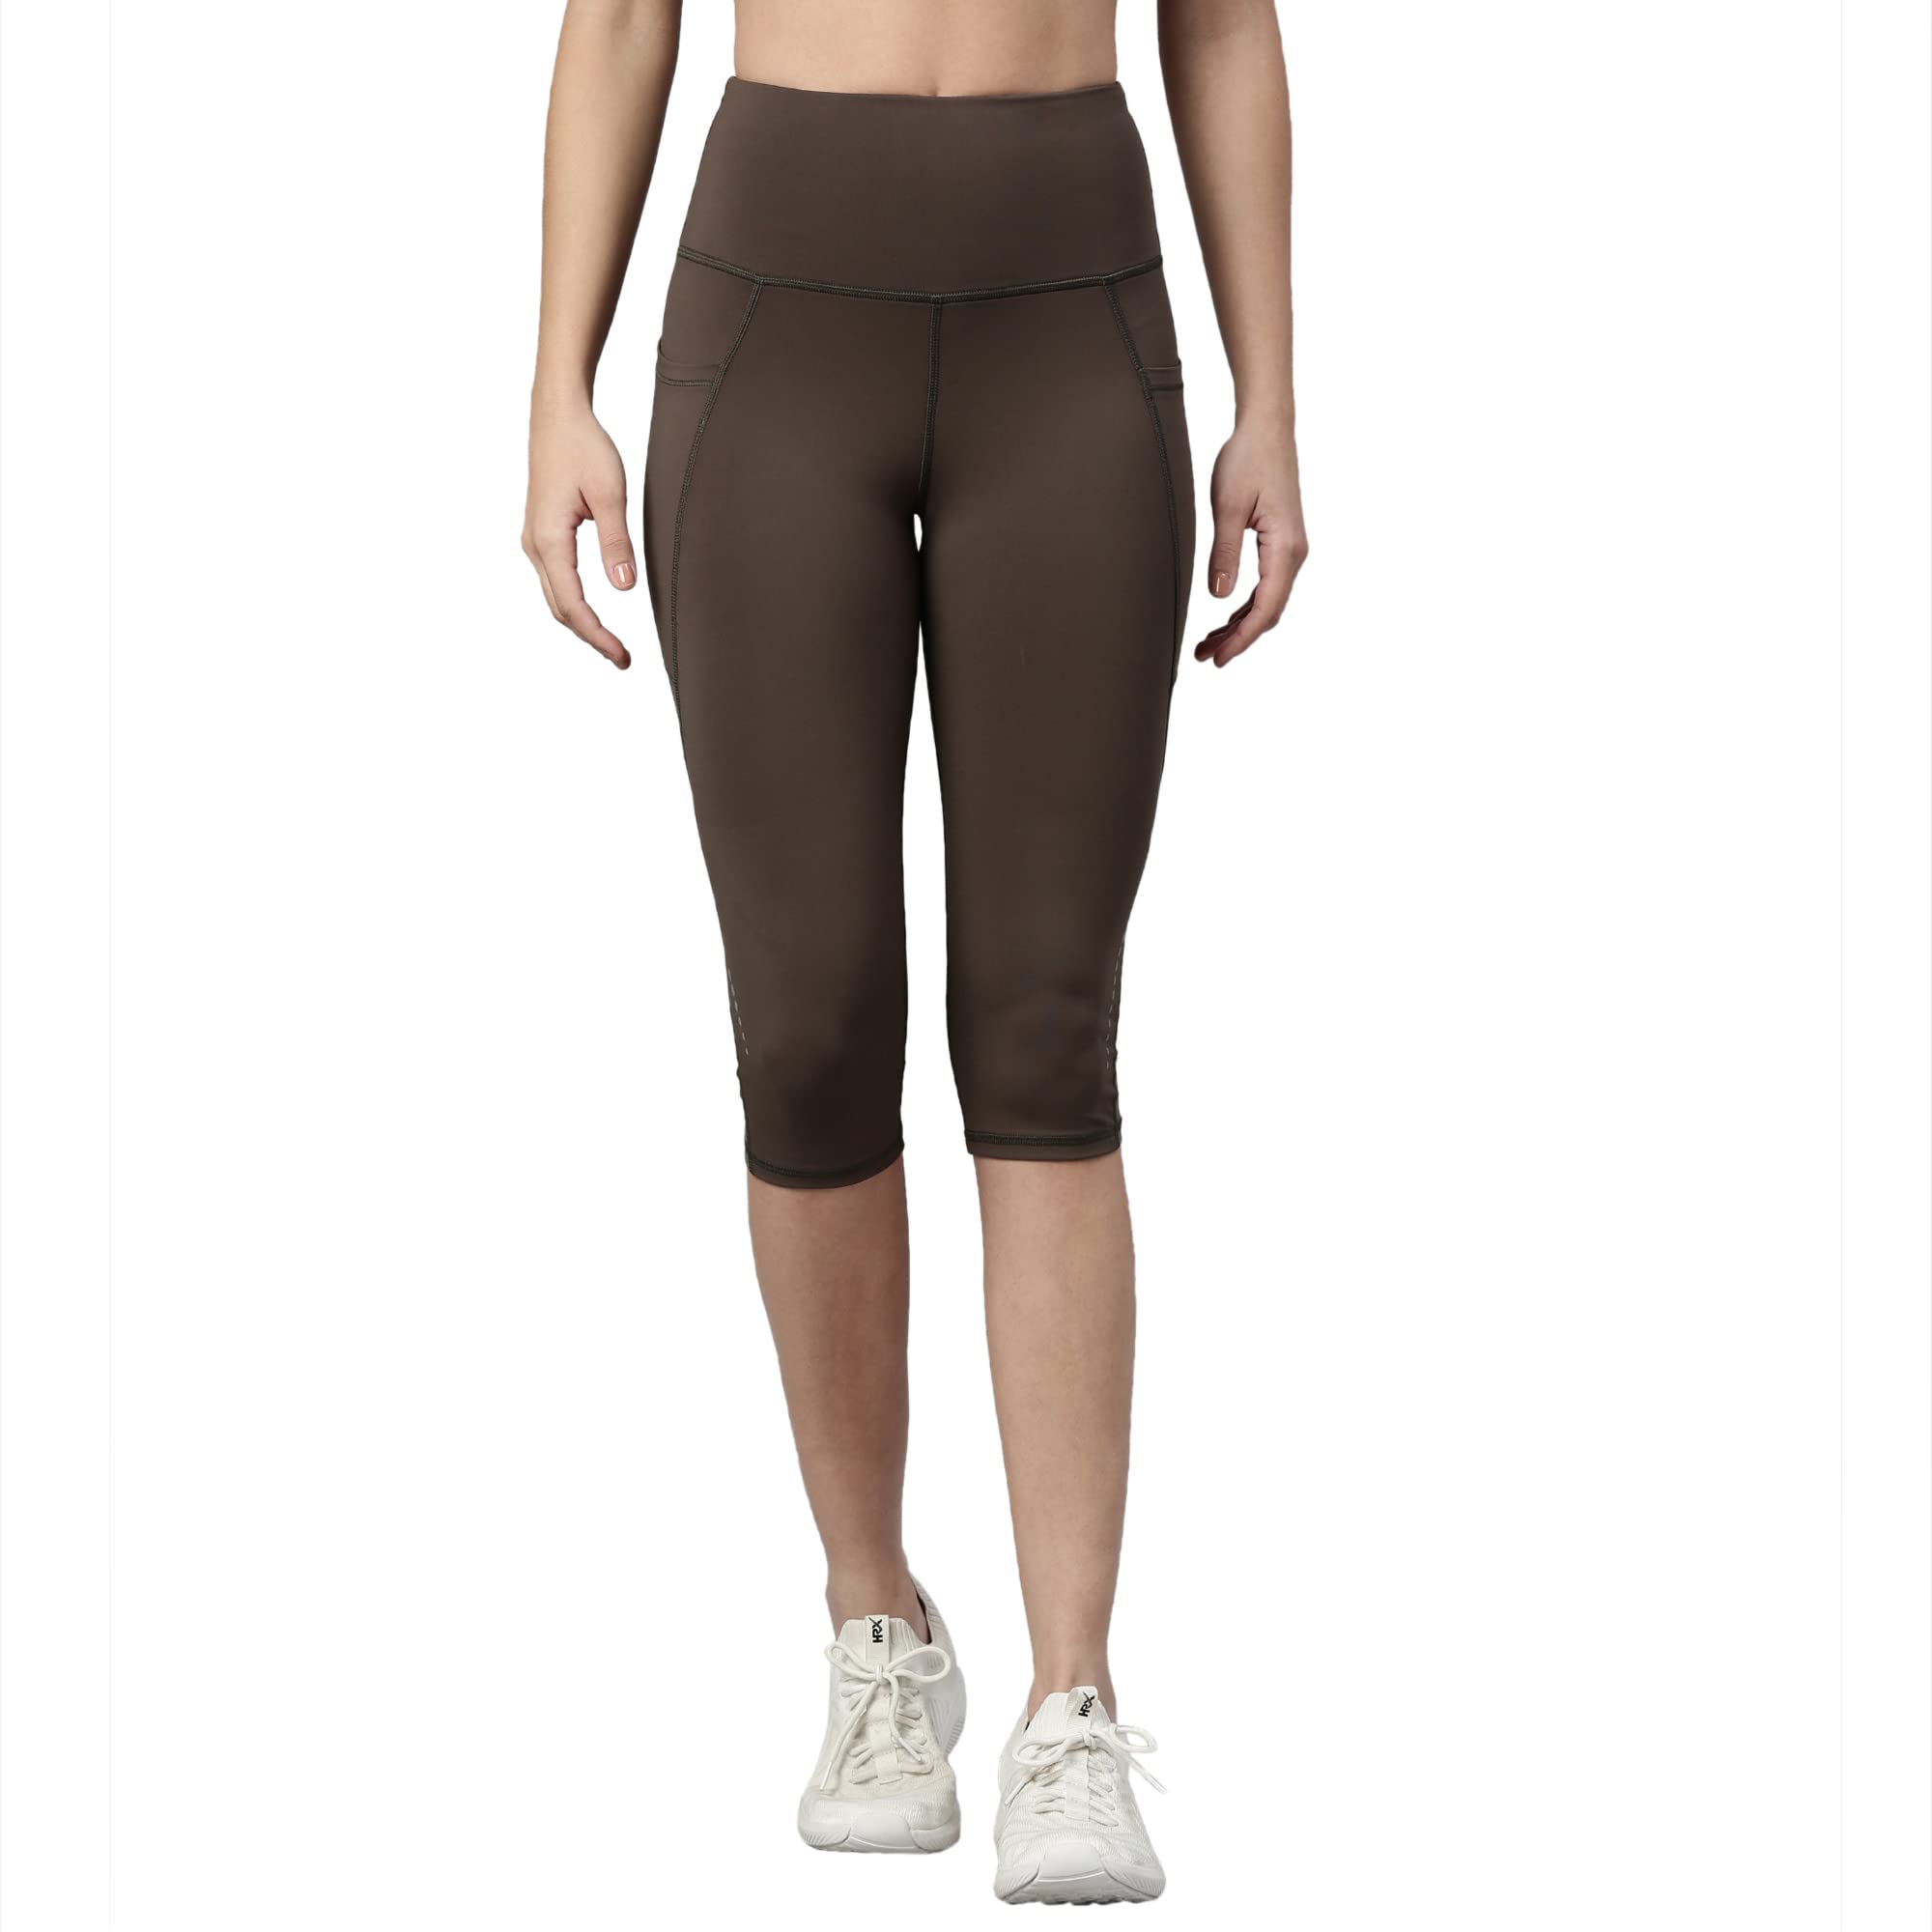 Athleisure - Buy Women's Athleisure, Activewear Collection Online at –  Enamor